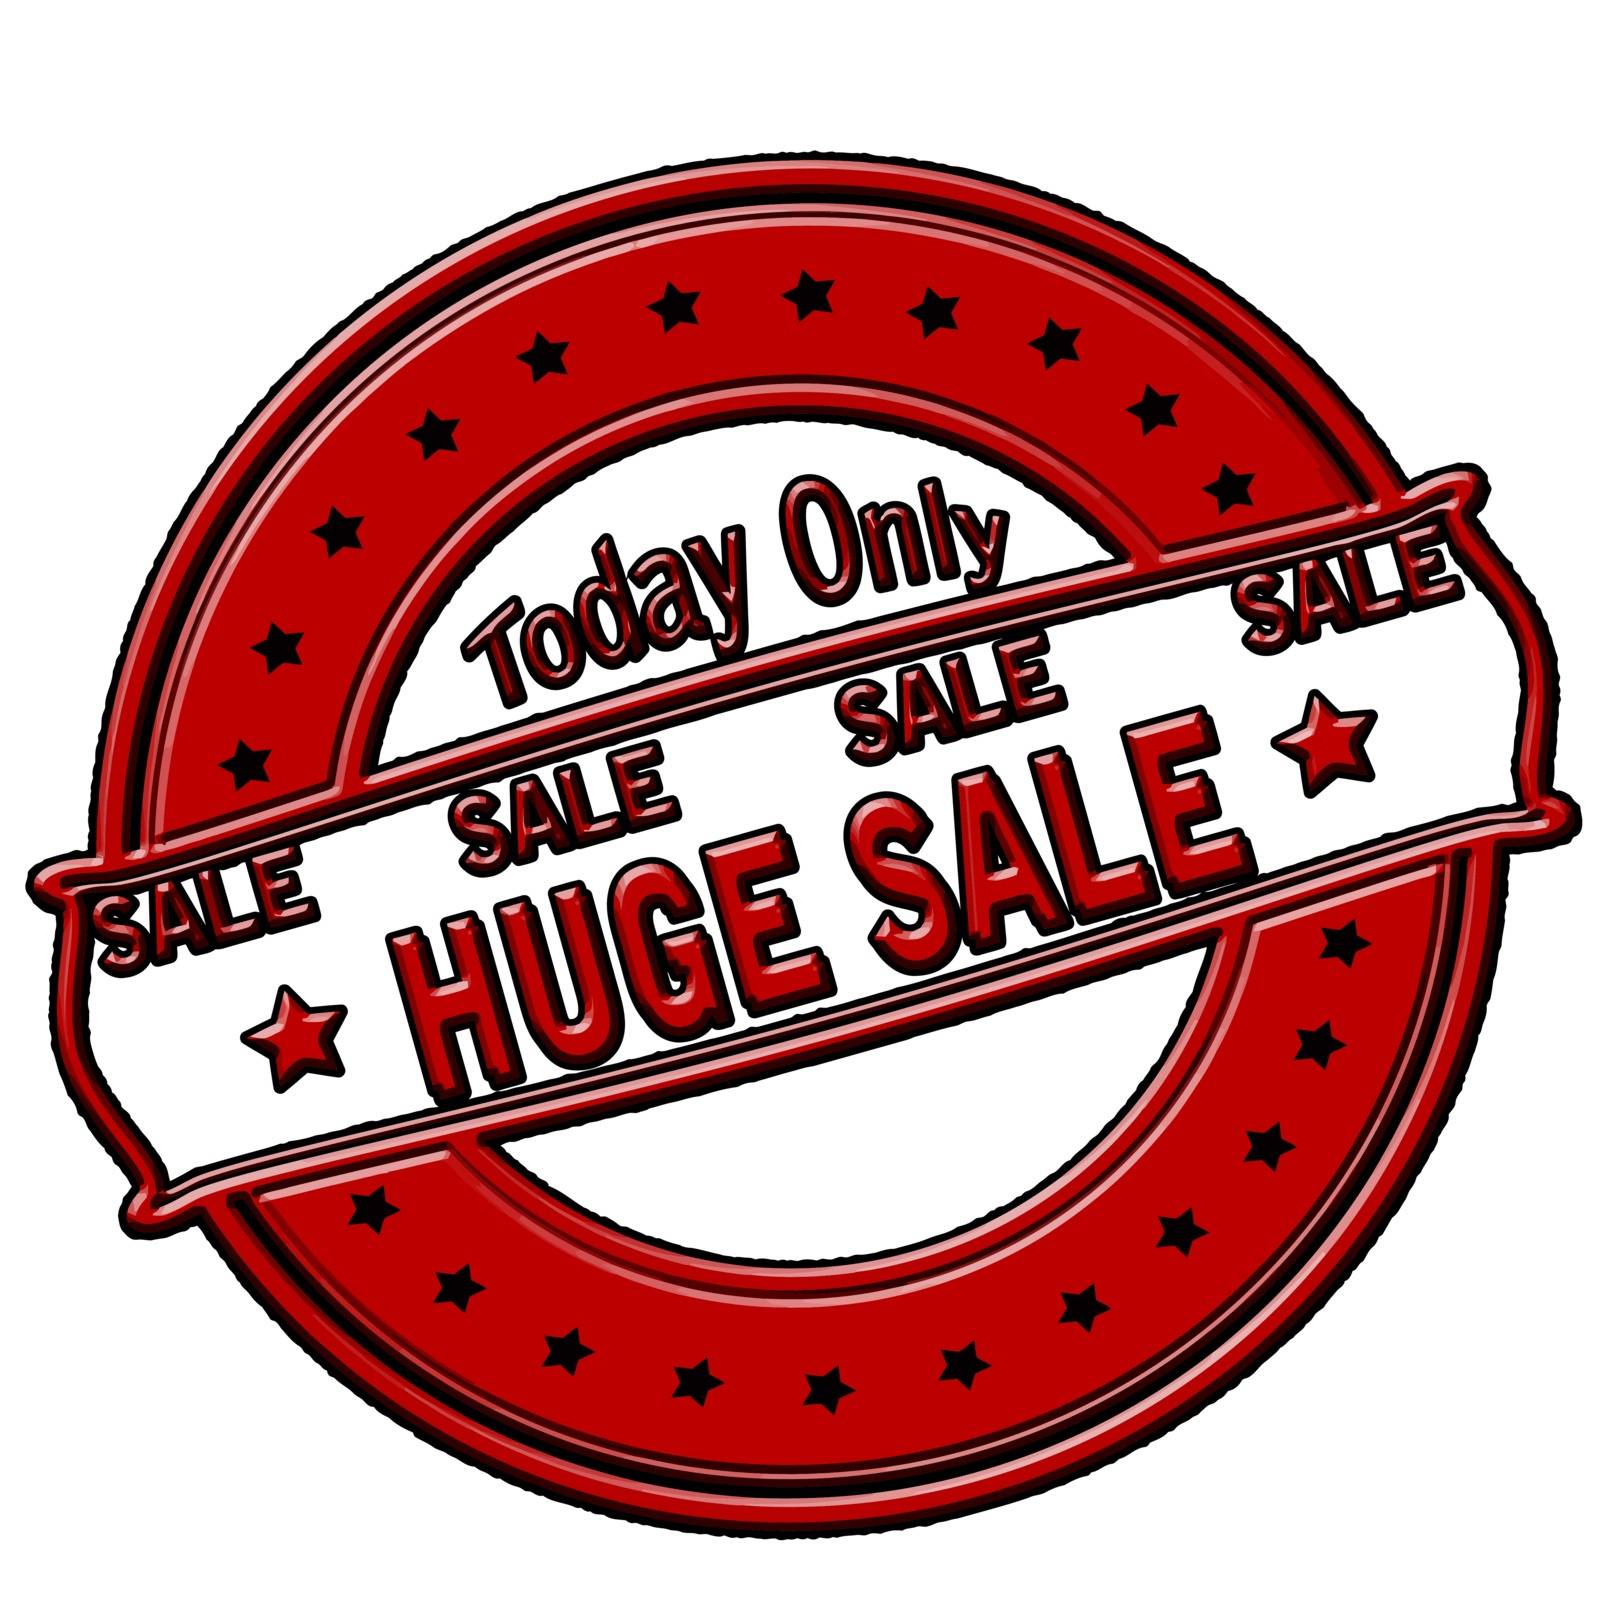 Today only huge sale by carmenbobo